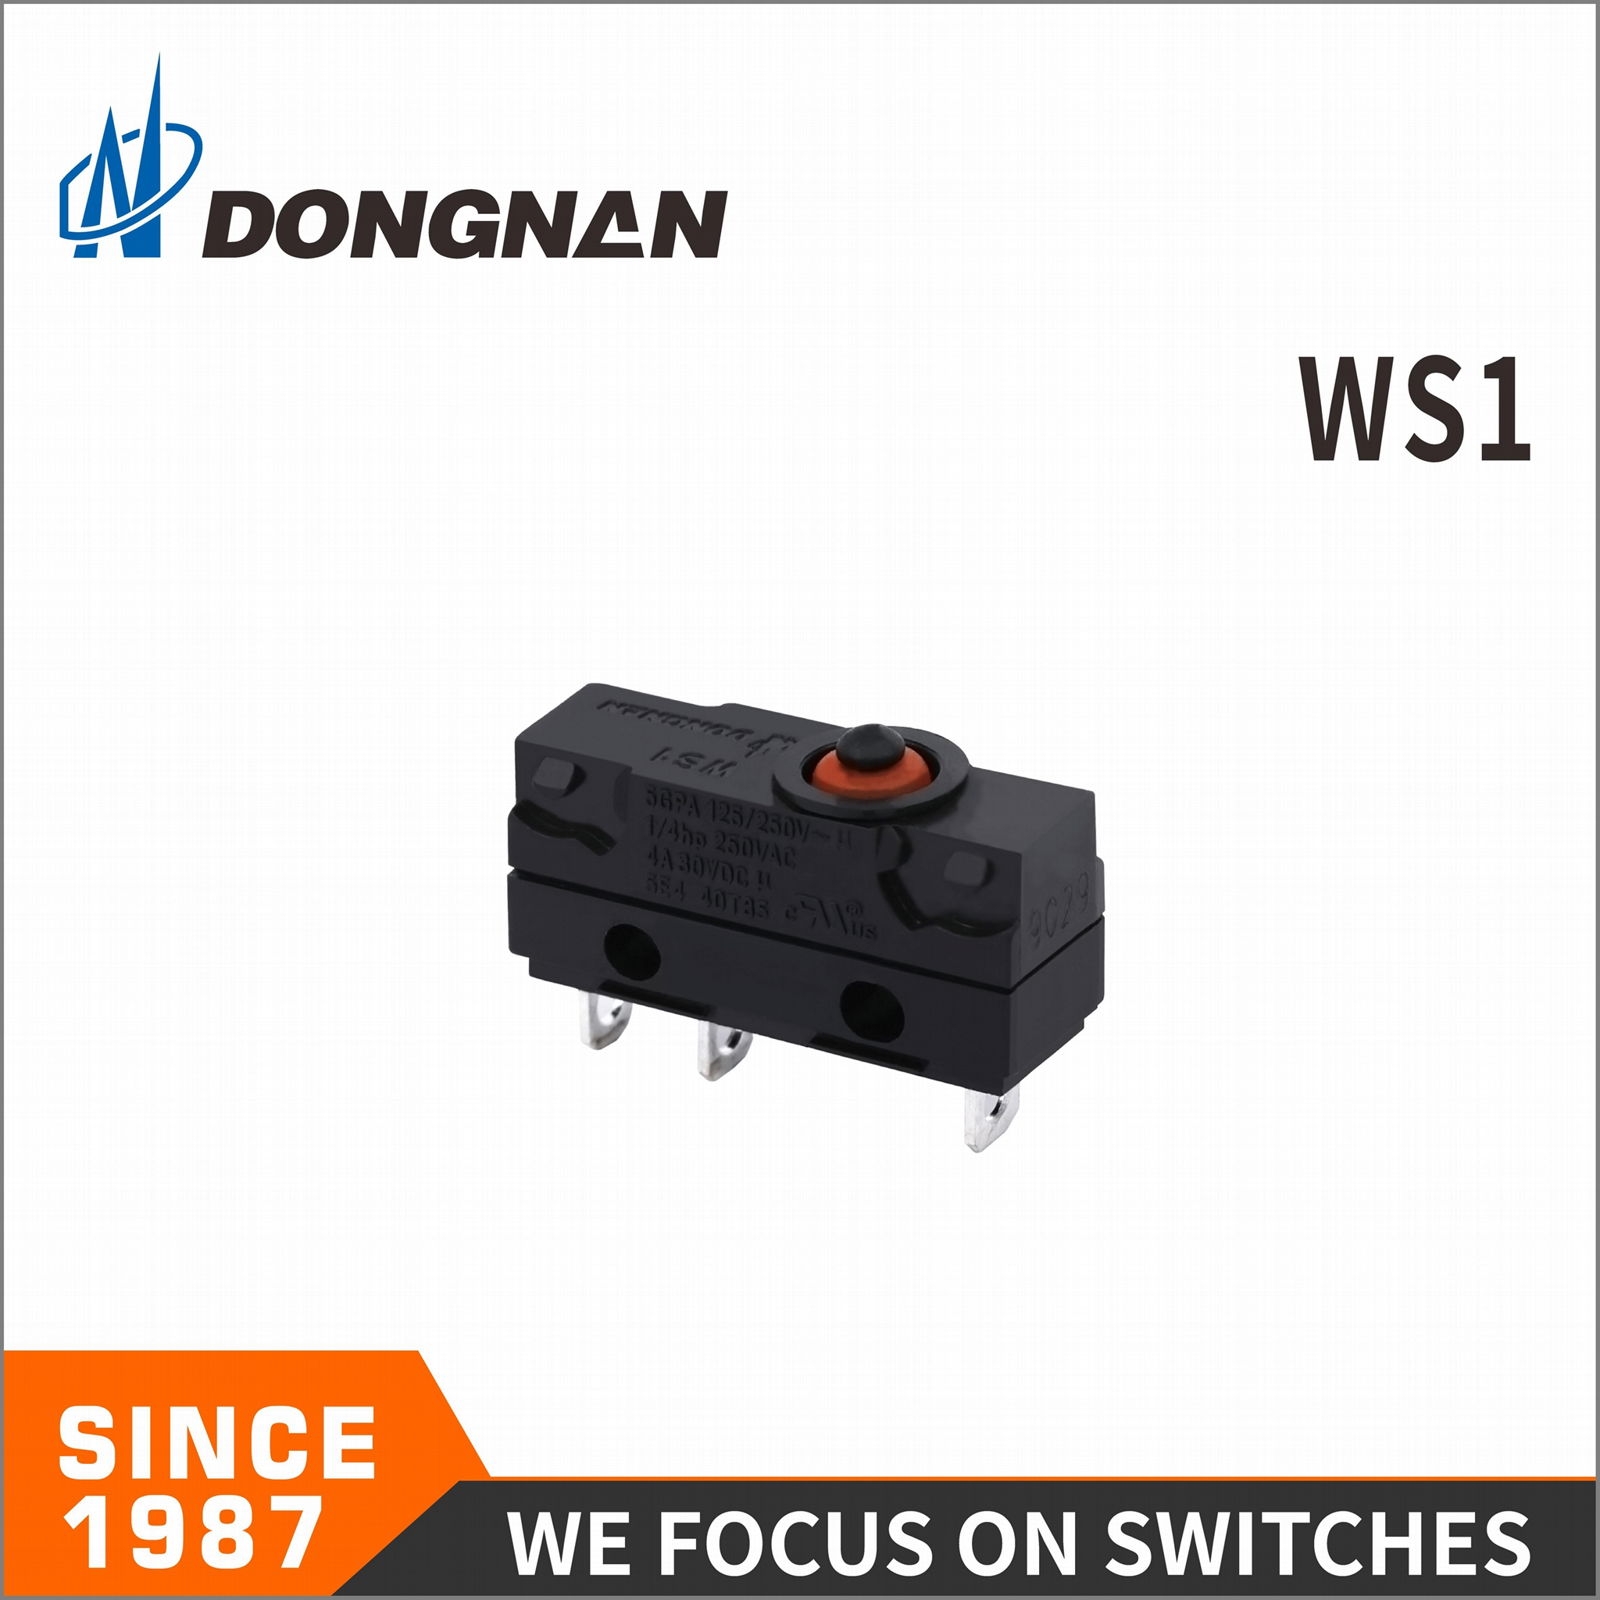 Dongnan IP67 Type Sealed Waterproof Switch Ws1 for Refrigerator 4